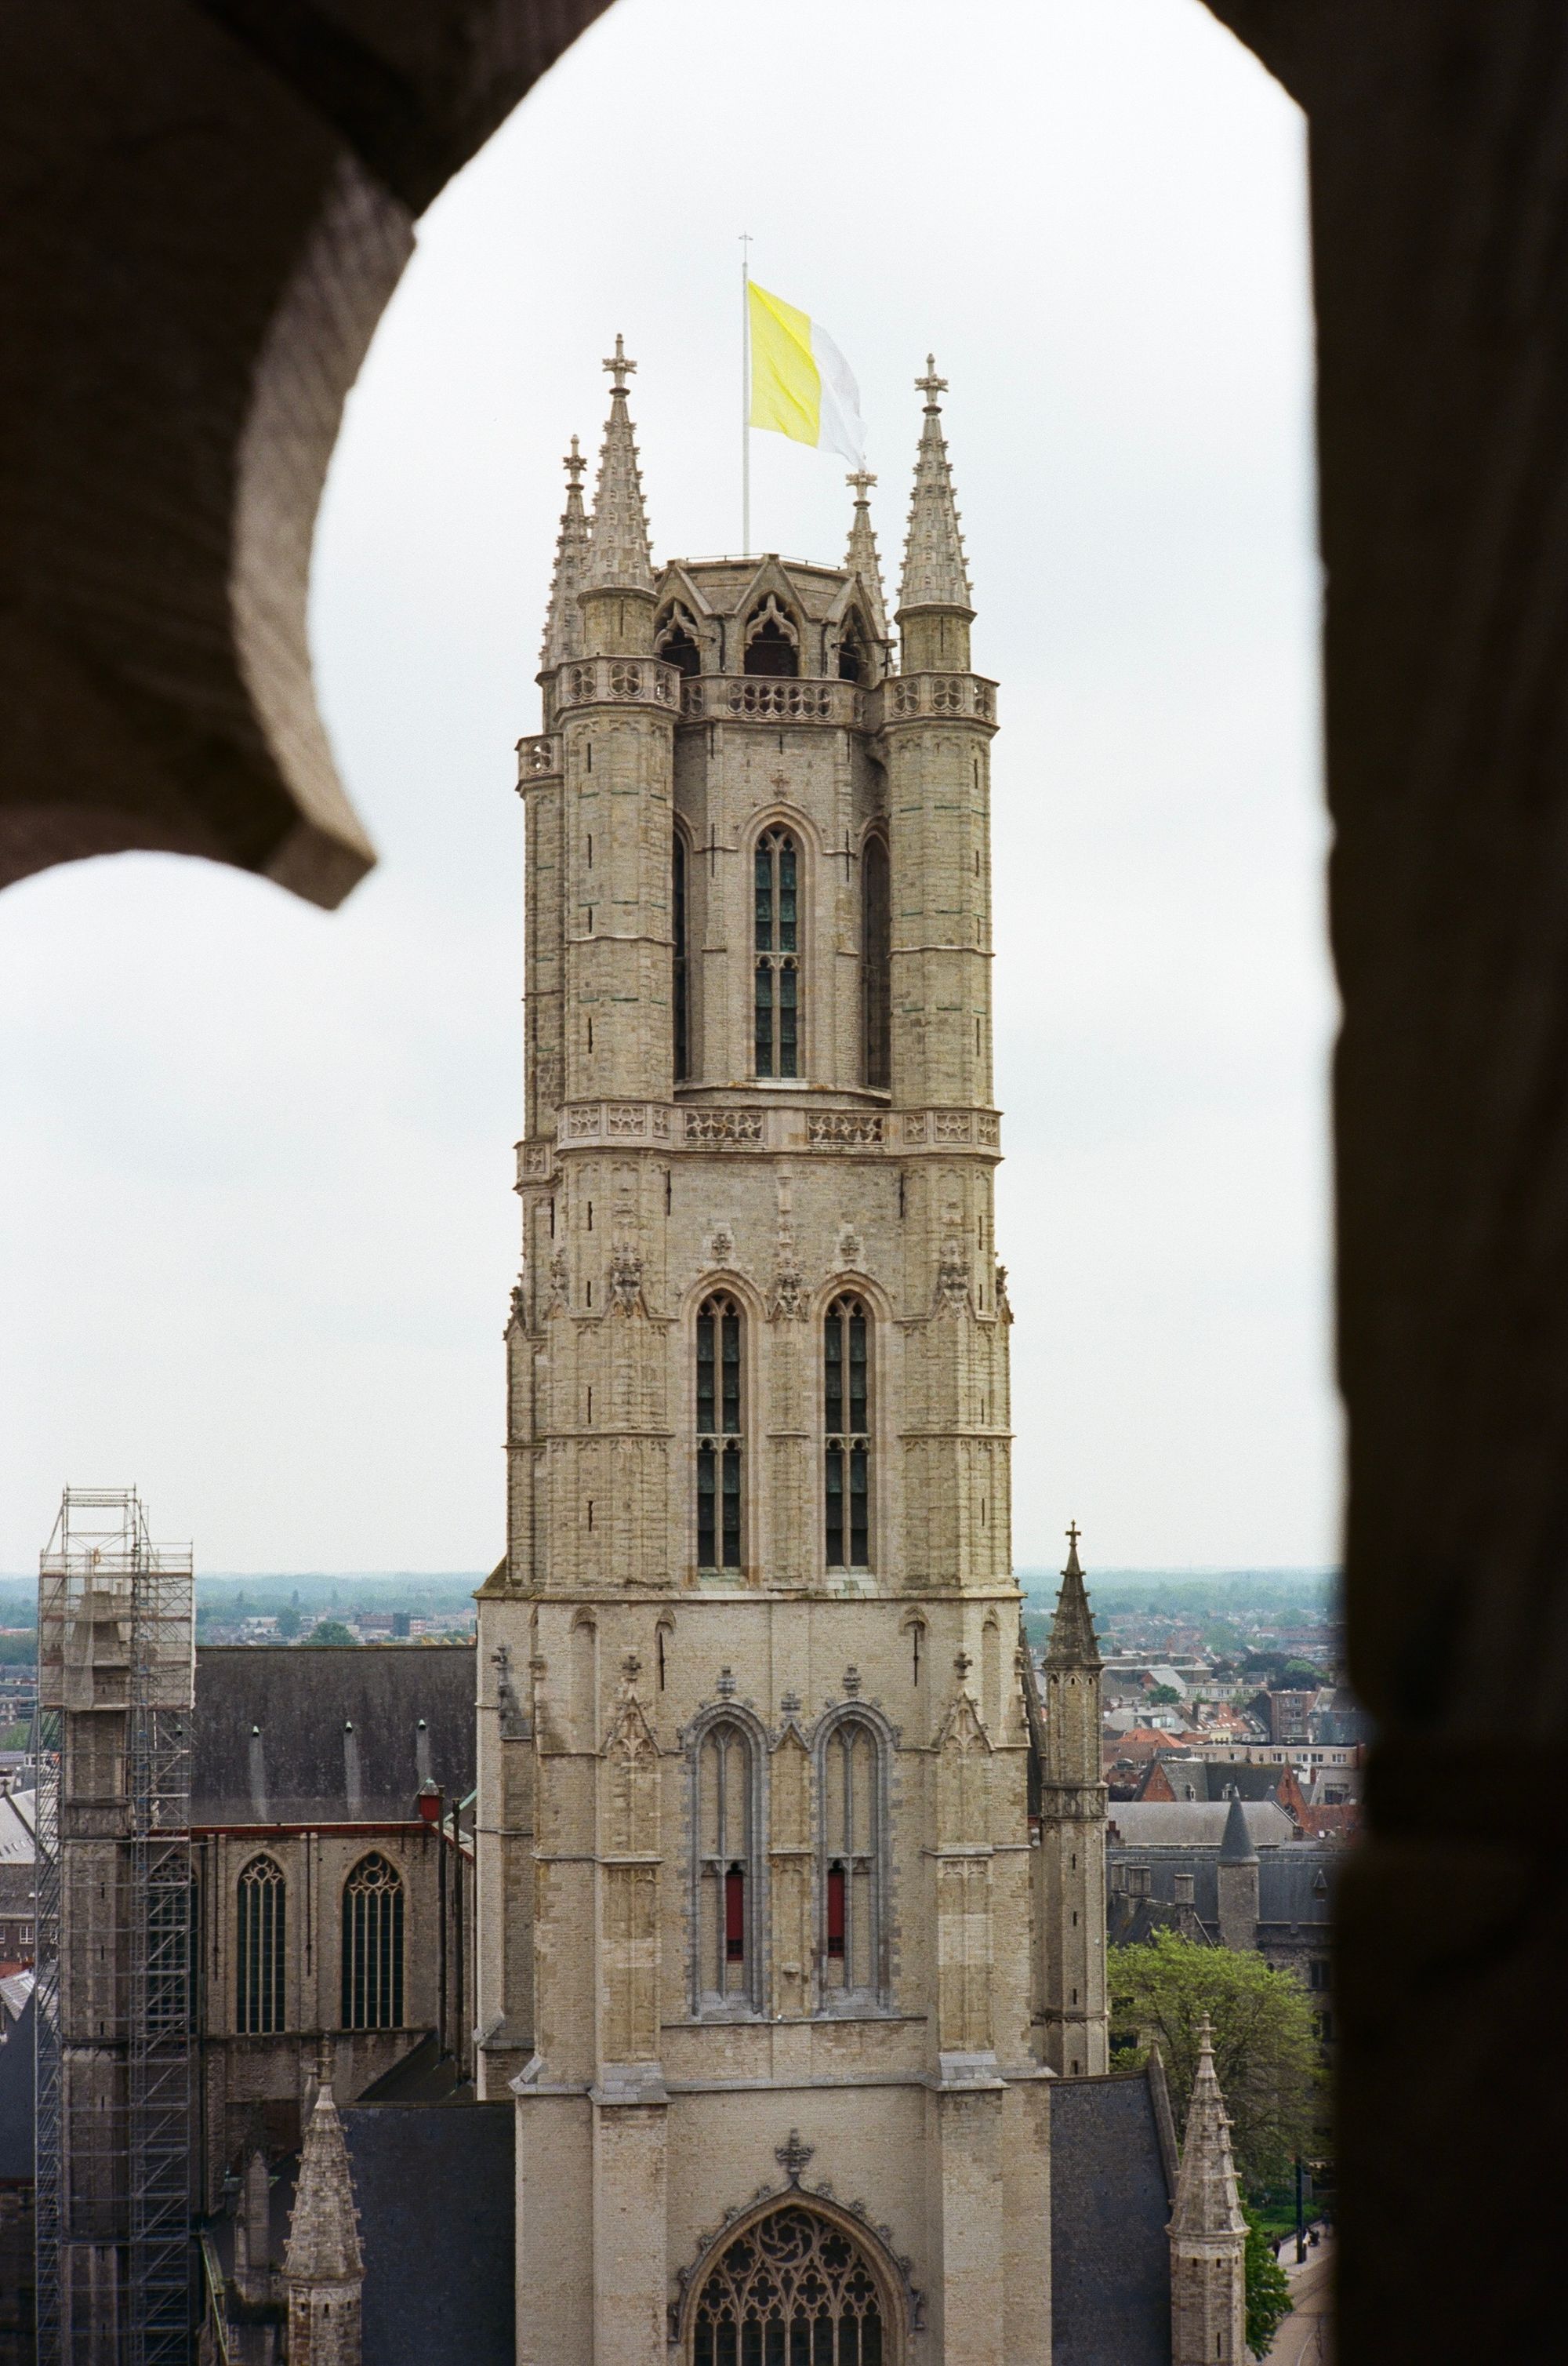 View of the cathedral from the beffroi - Ektar 100 - Canon 50mm LTM f1.4 - Leica M5